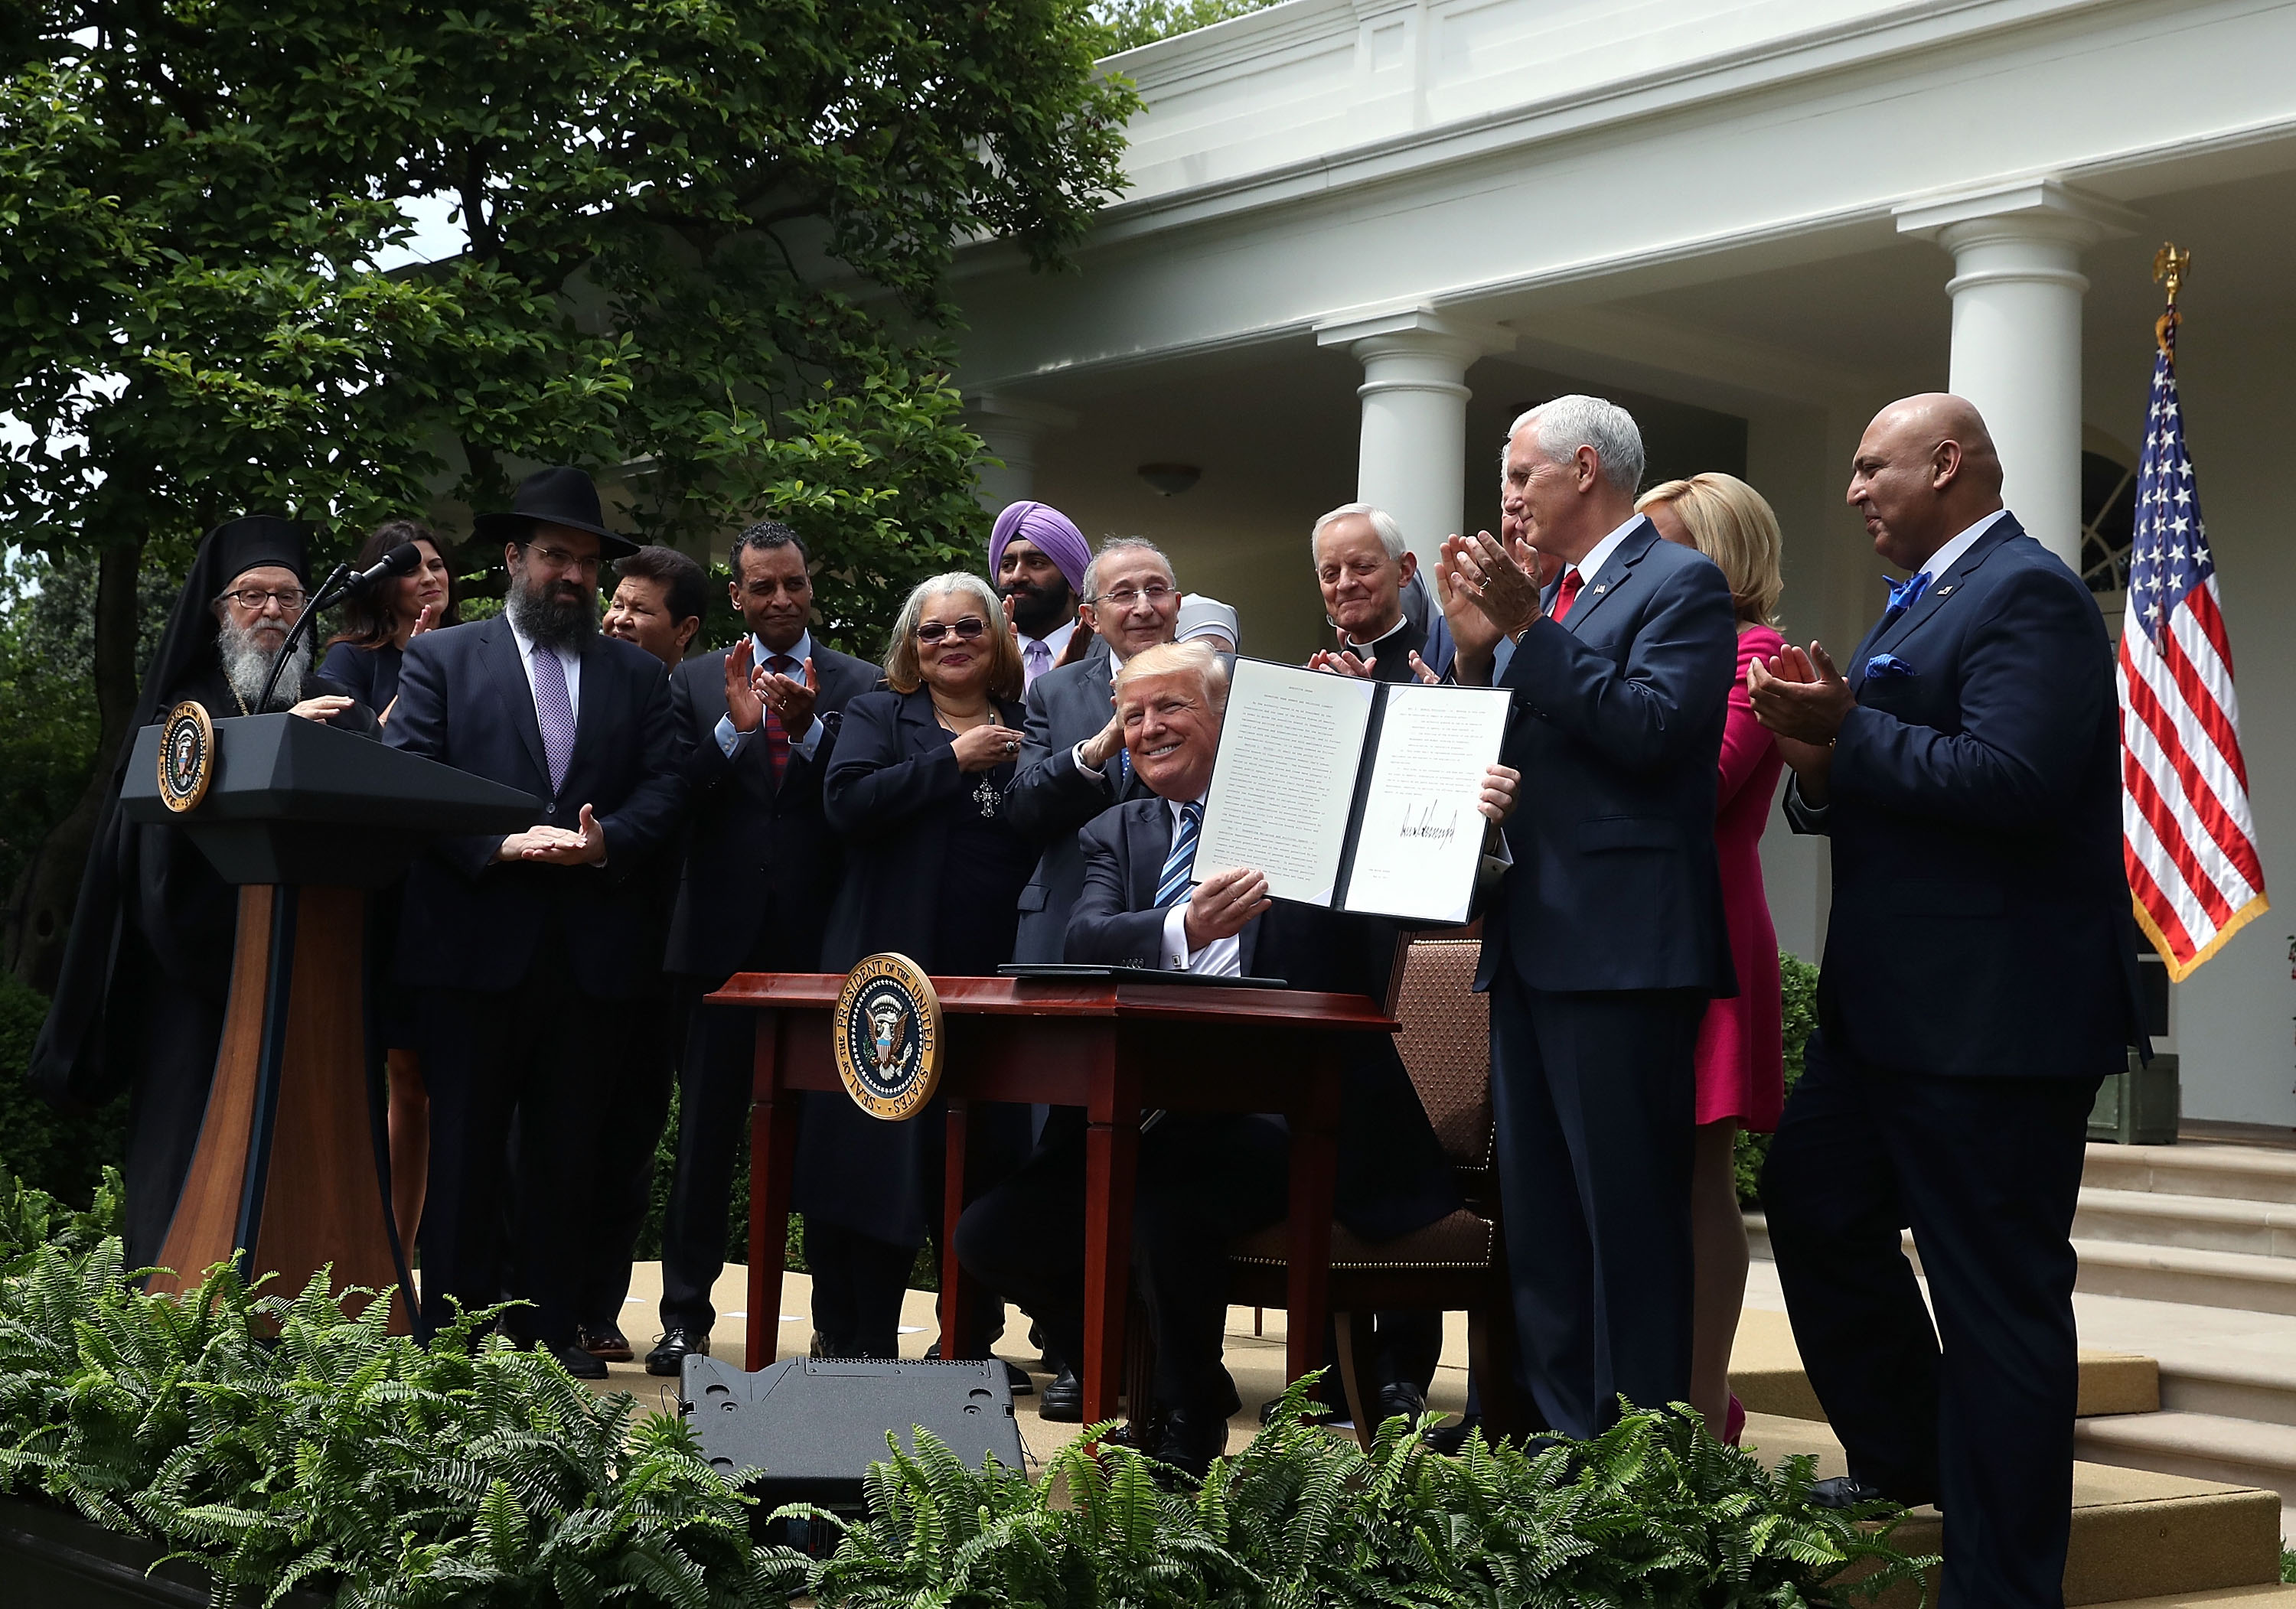 President Trump signs a new executive order on religious liberty.